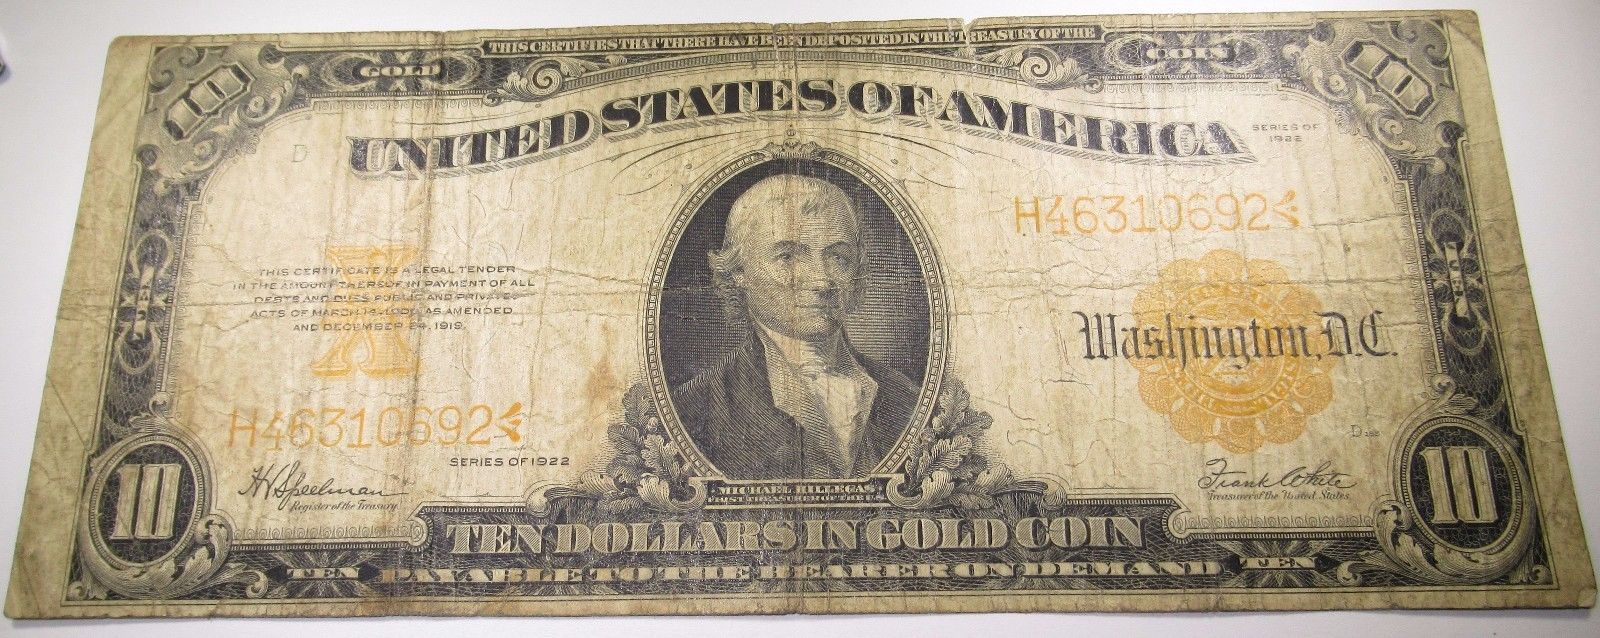 1922 US $10 Gold Certificate Bill Note Antique U.S. Dollar Currency USA Money